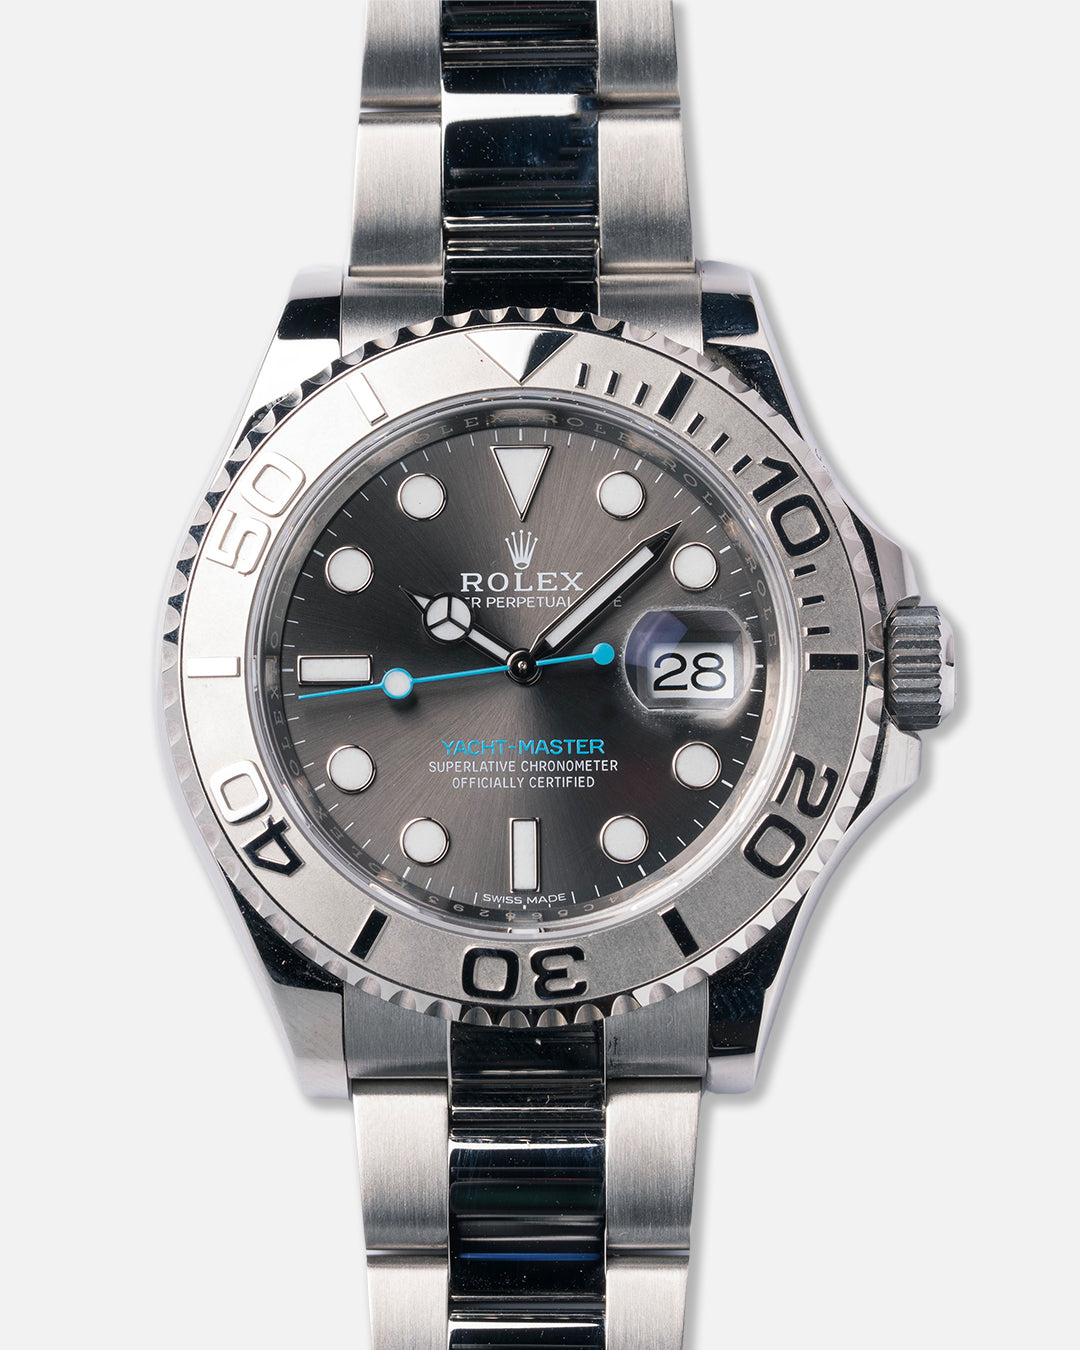 Rolex Yacht Master 116622 unboxing initial view stainless steel